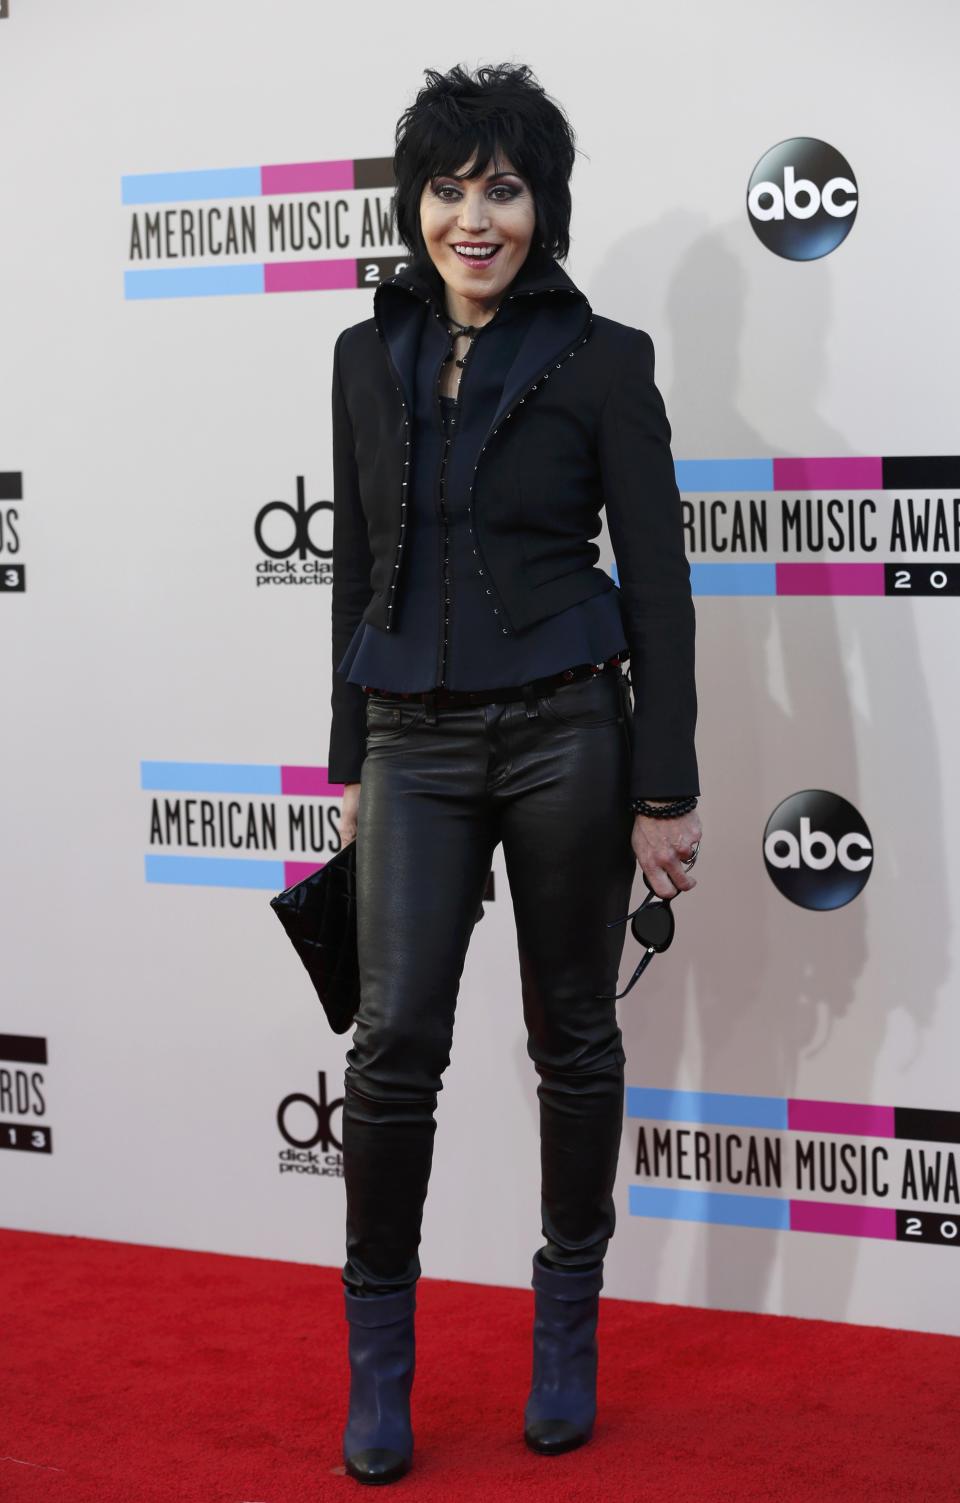 Musician Joan Jett arrives at the 41st American Music Awards in Los Angeles